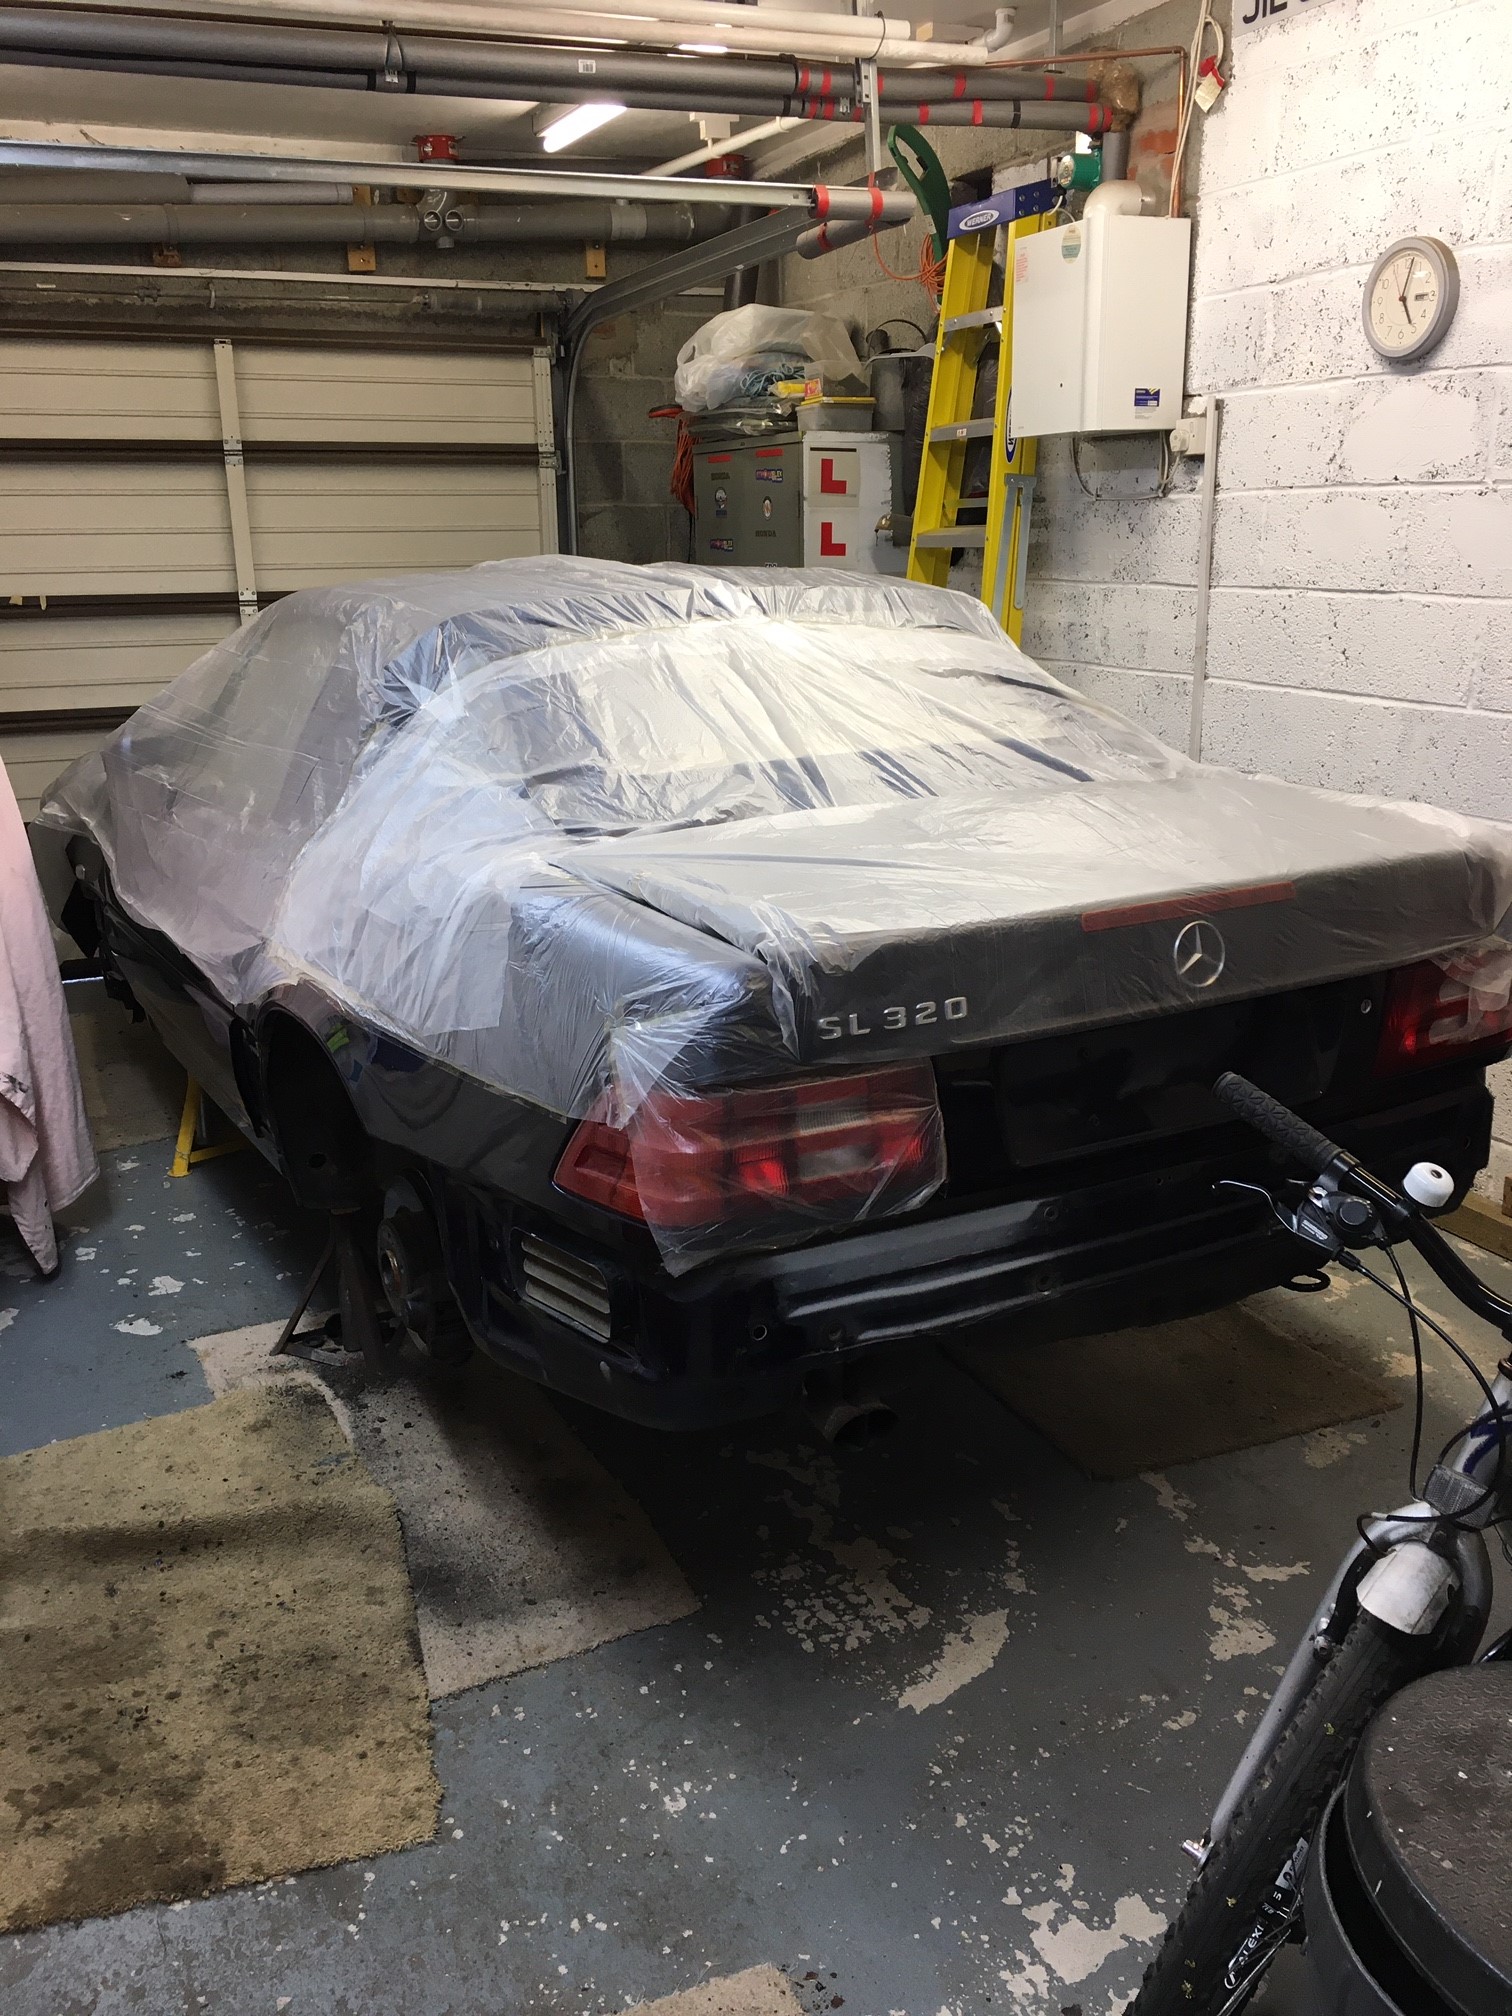 Mercedes SL320 R129 - Part 2 - Page 4 - Readers' Cars - PistonHeads